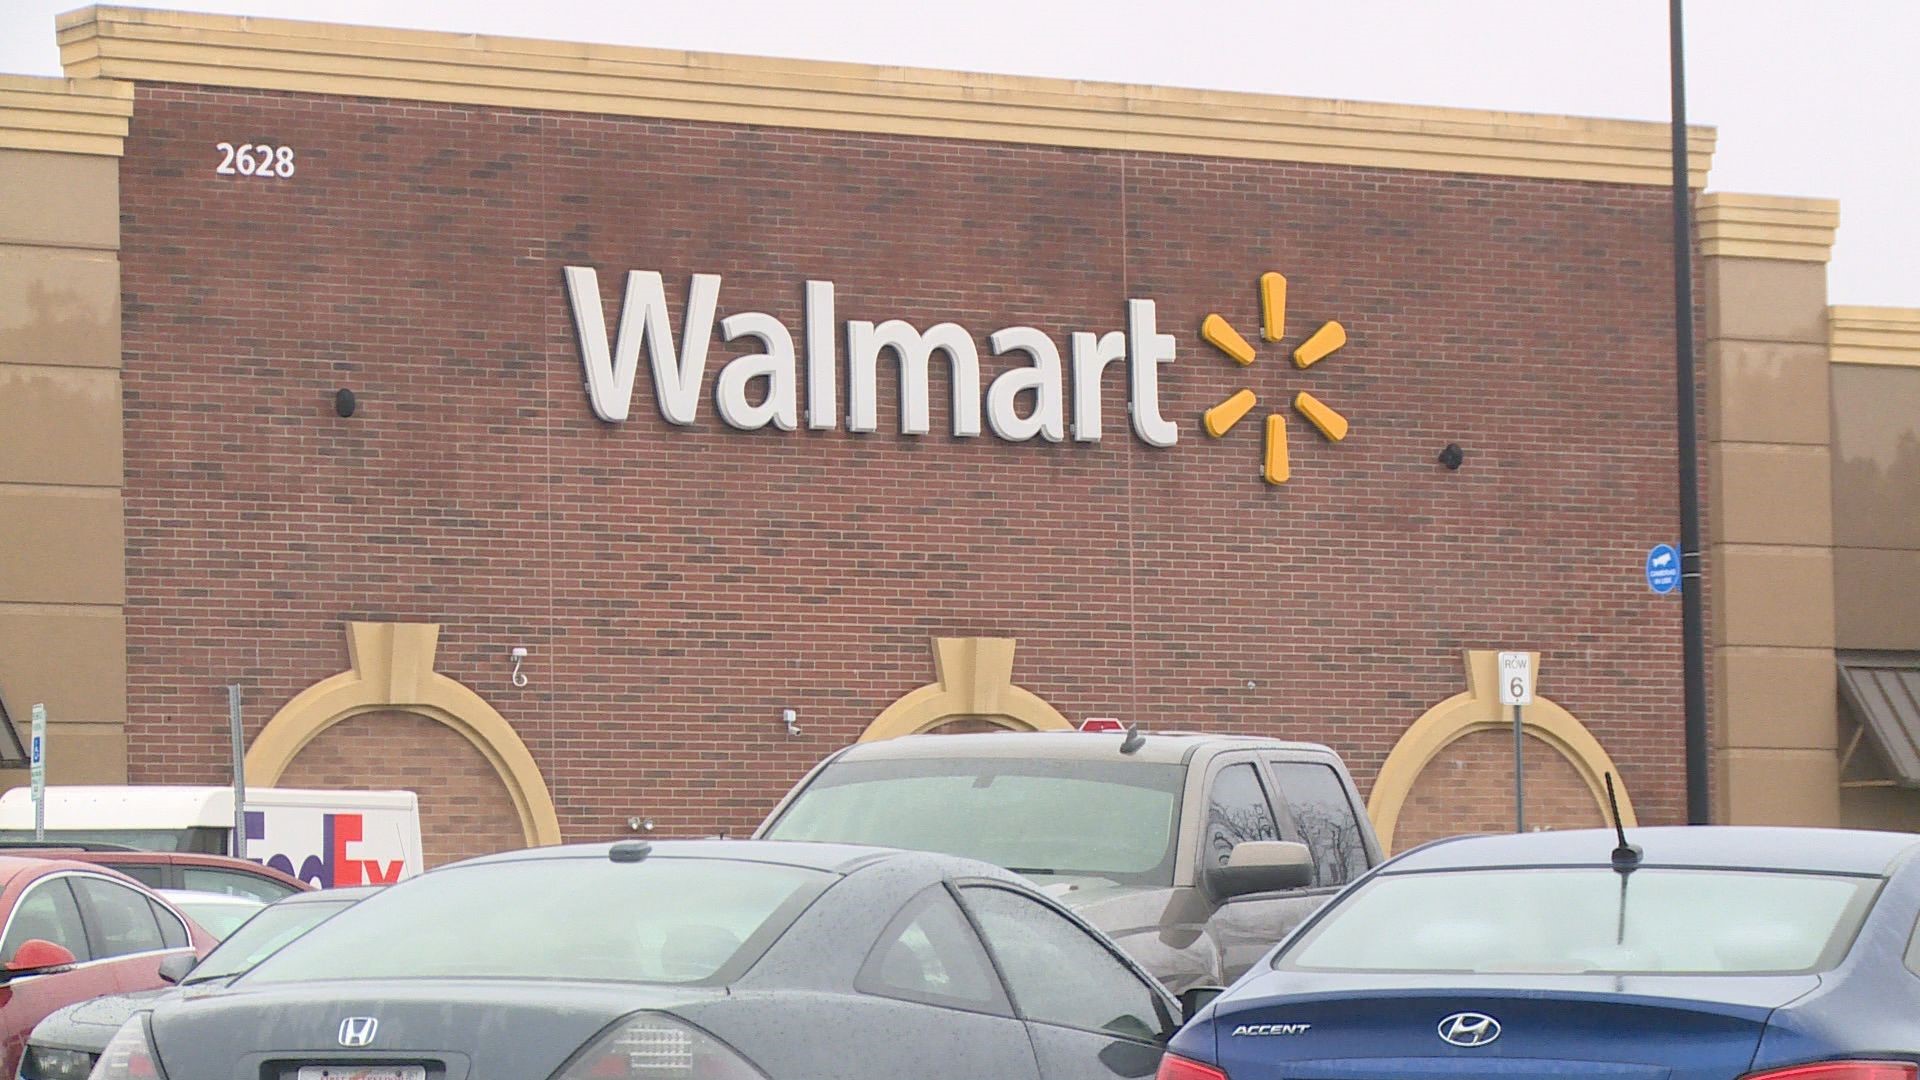 Investigators said anyone who shopped at a Walmart in the High Point area during the holidays should change their PIN number and check their bank statements.